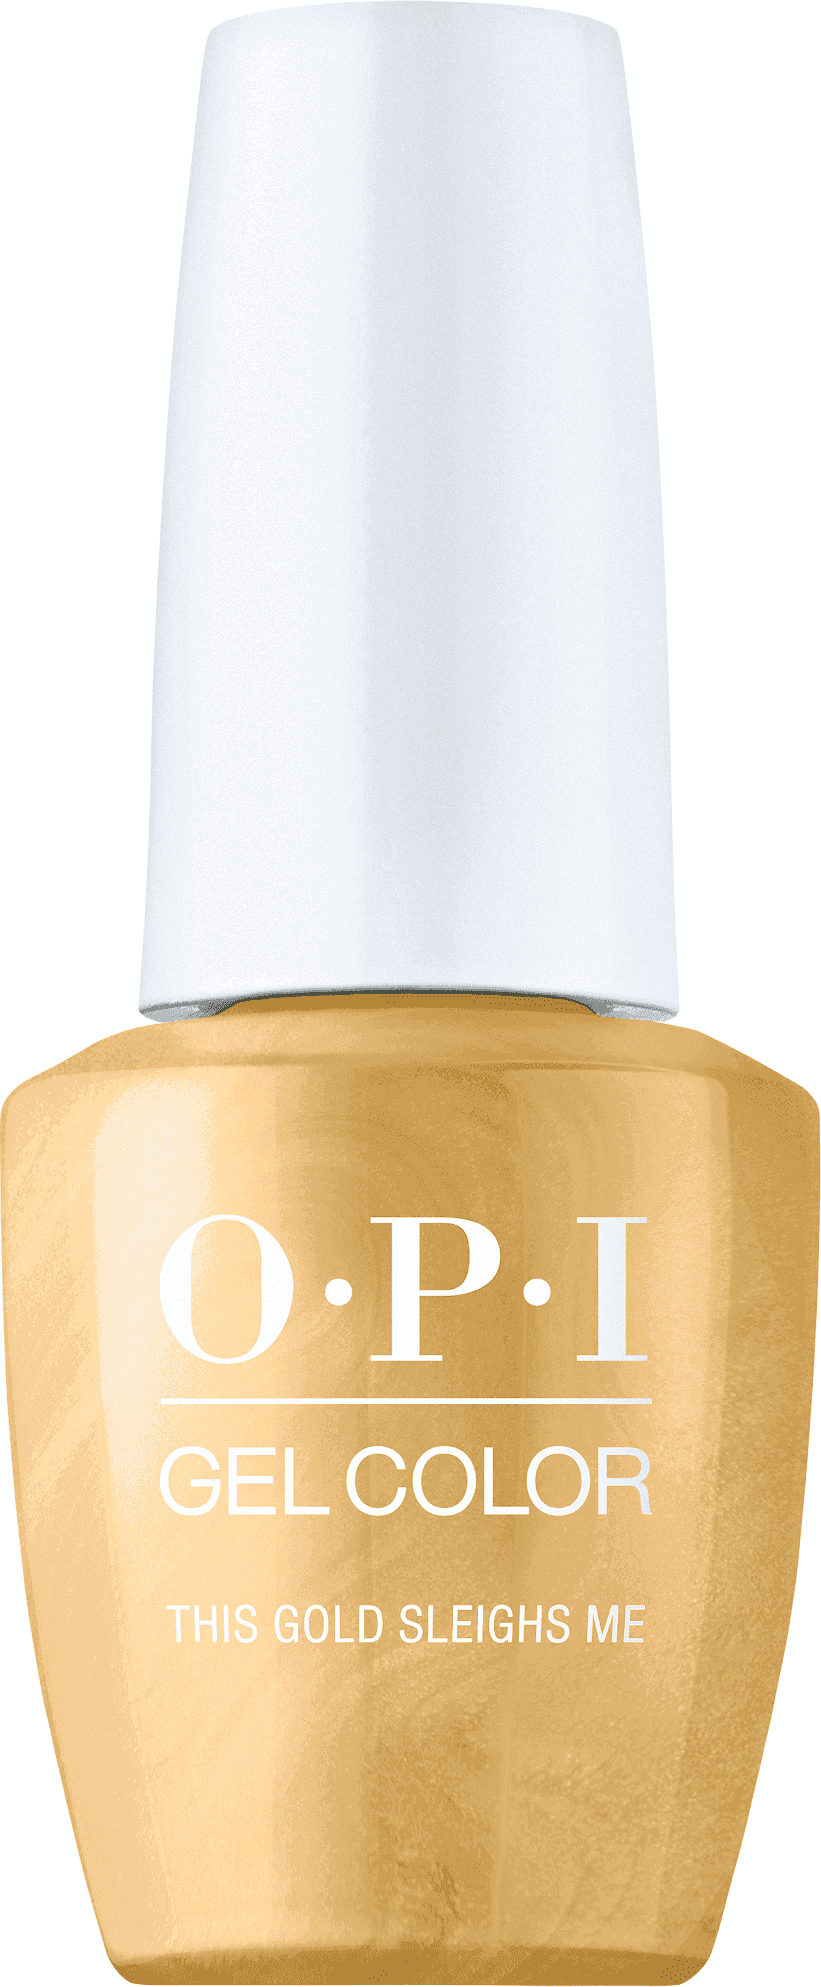 OPI GelColor - This Gold Sleighs Me  - GCM05